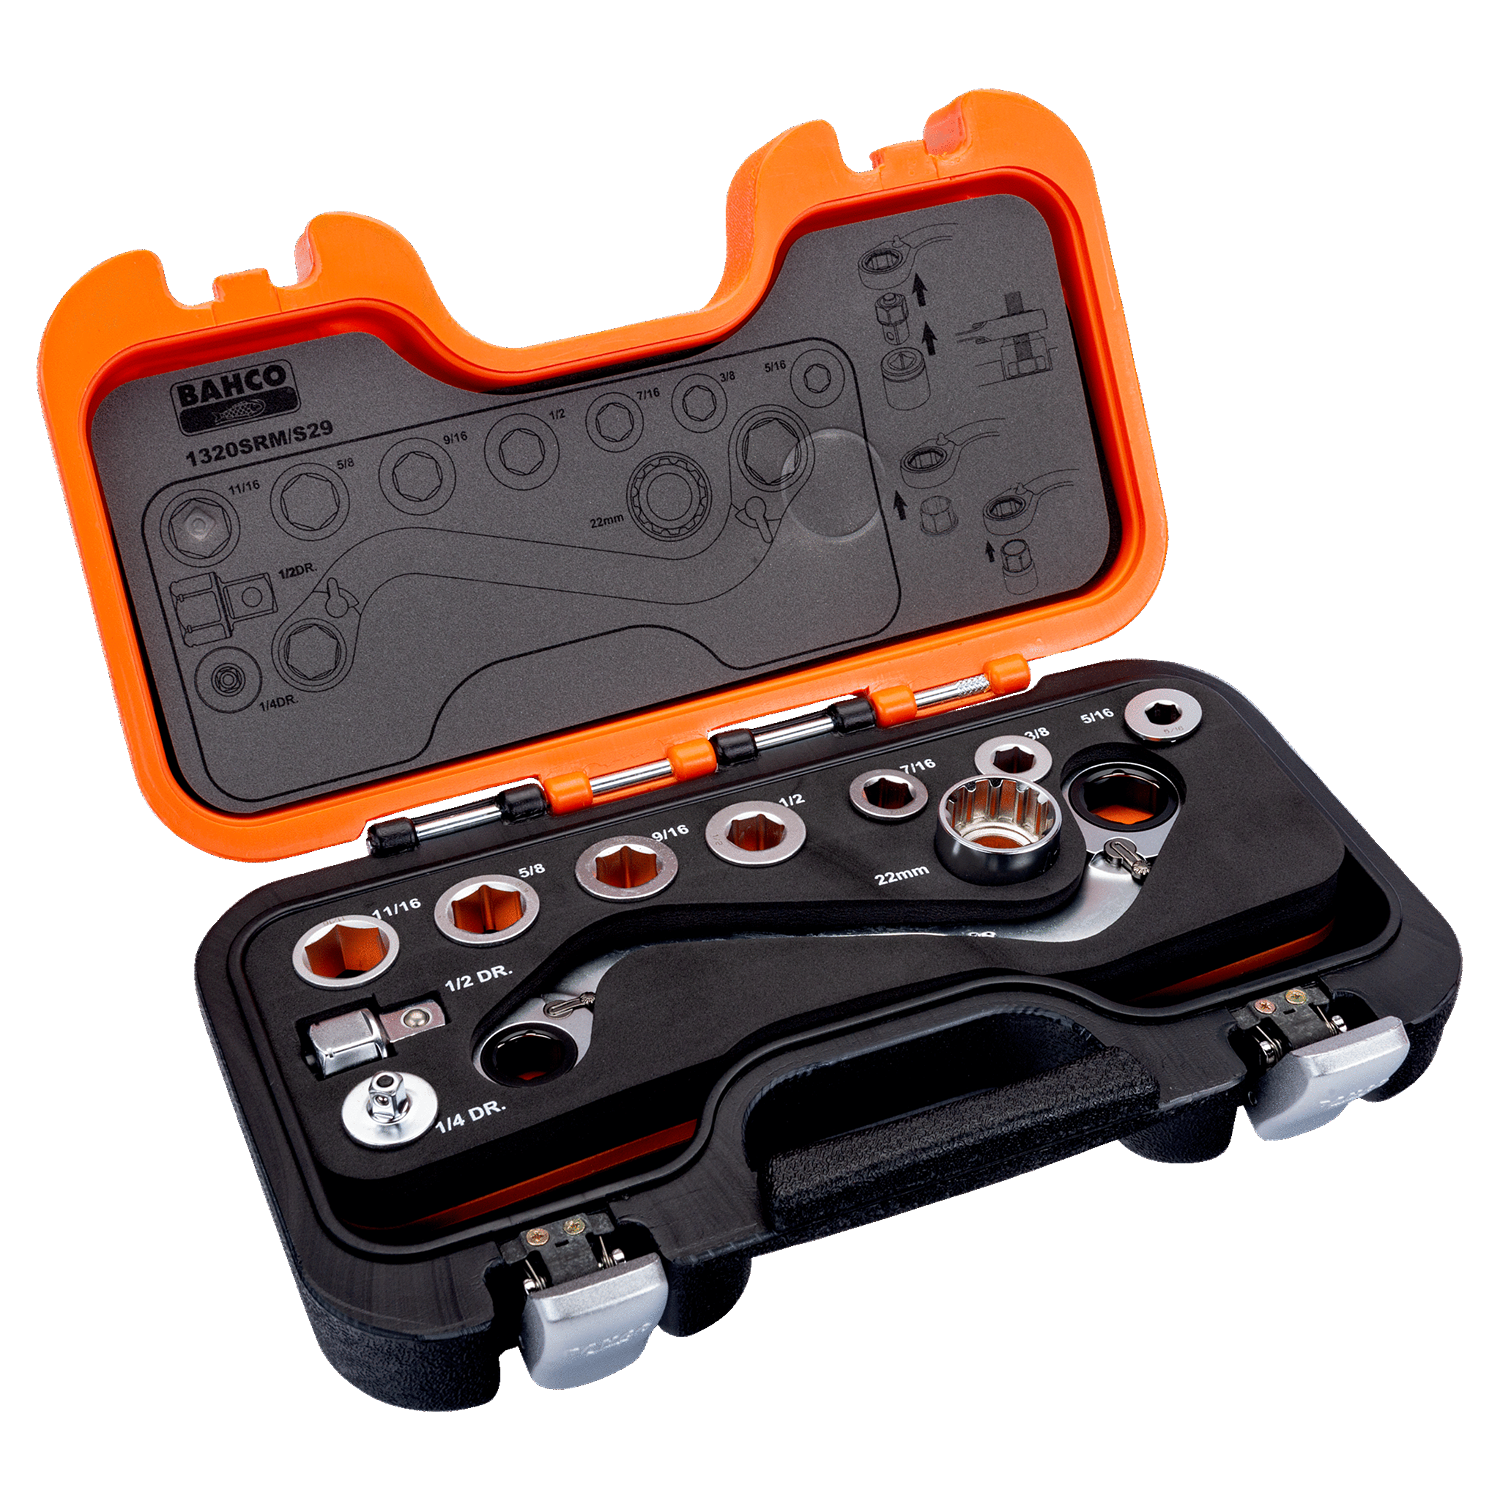 BAHCO 1320SRM/S29 S Type Ratcheting Ring Wrench and Adaptor Set - Premium Adaptor Set from BAHCO - Shop now at Yew Aik.